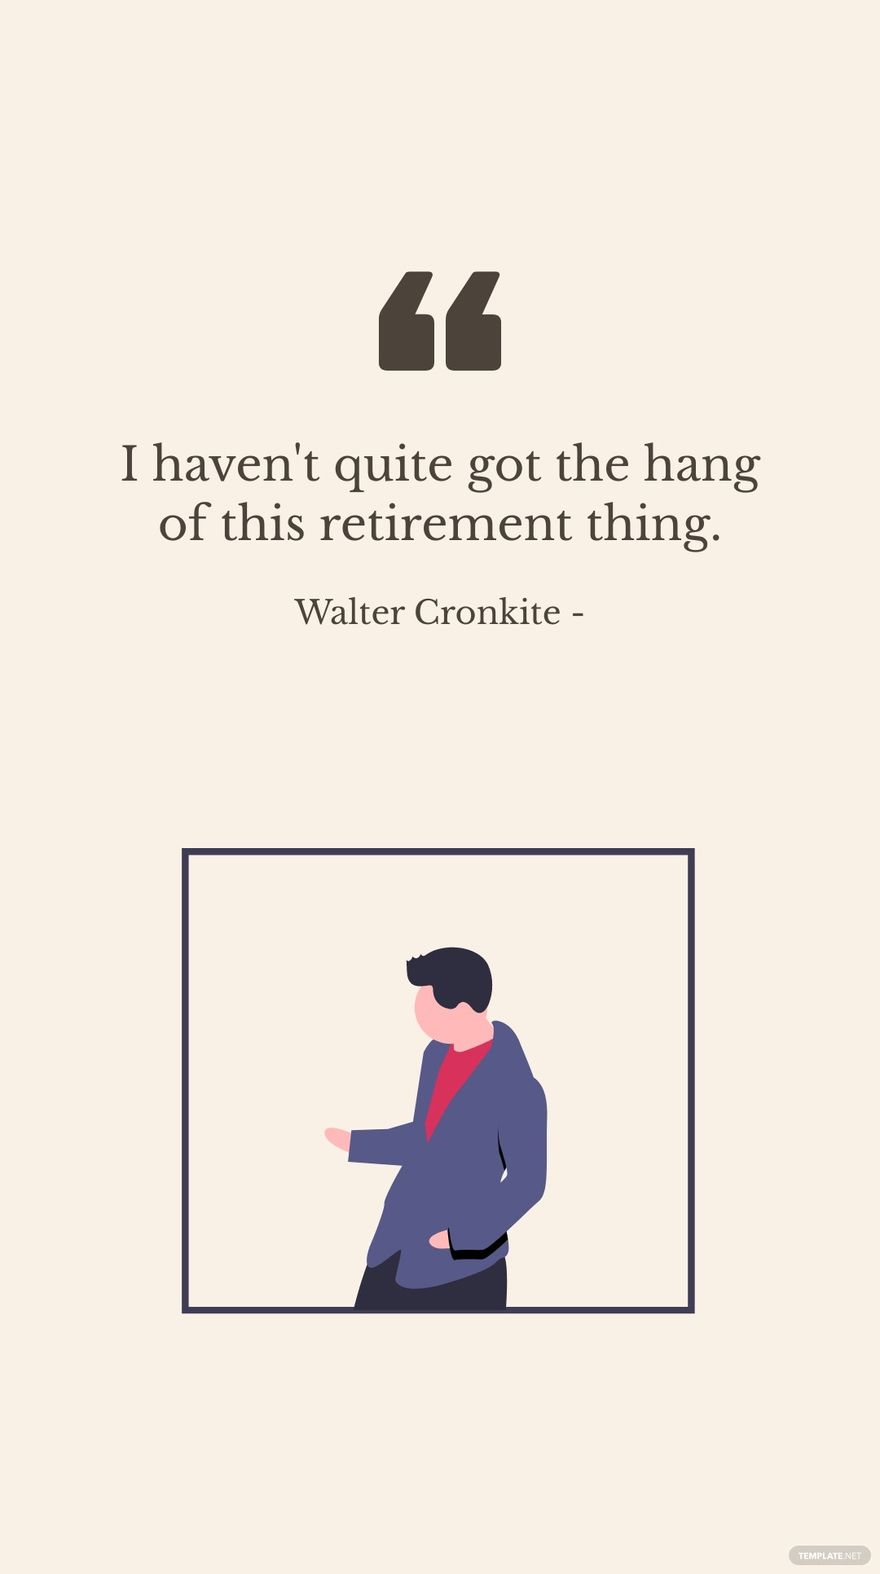 Walter Cronkite - I haven't quite got the hang of this retirement thing. in JPG